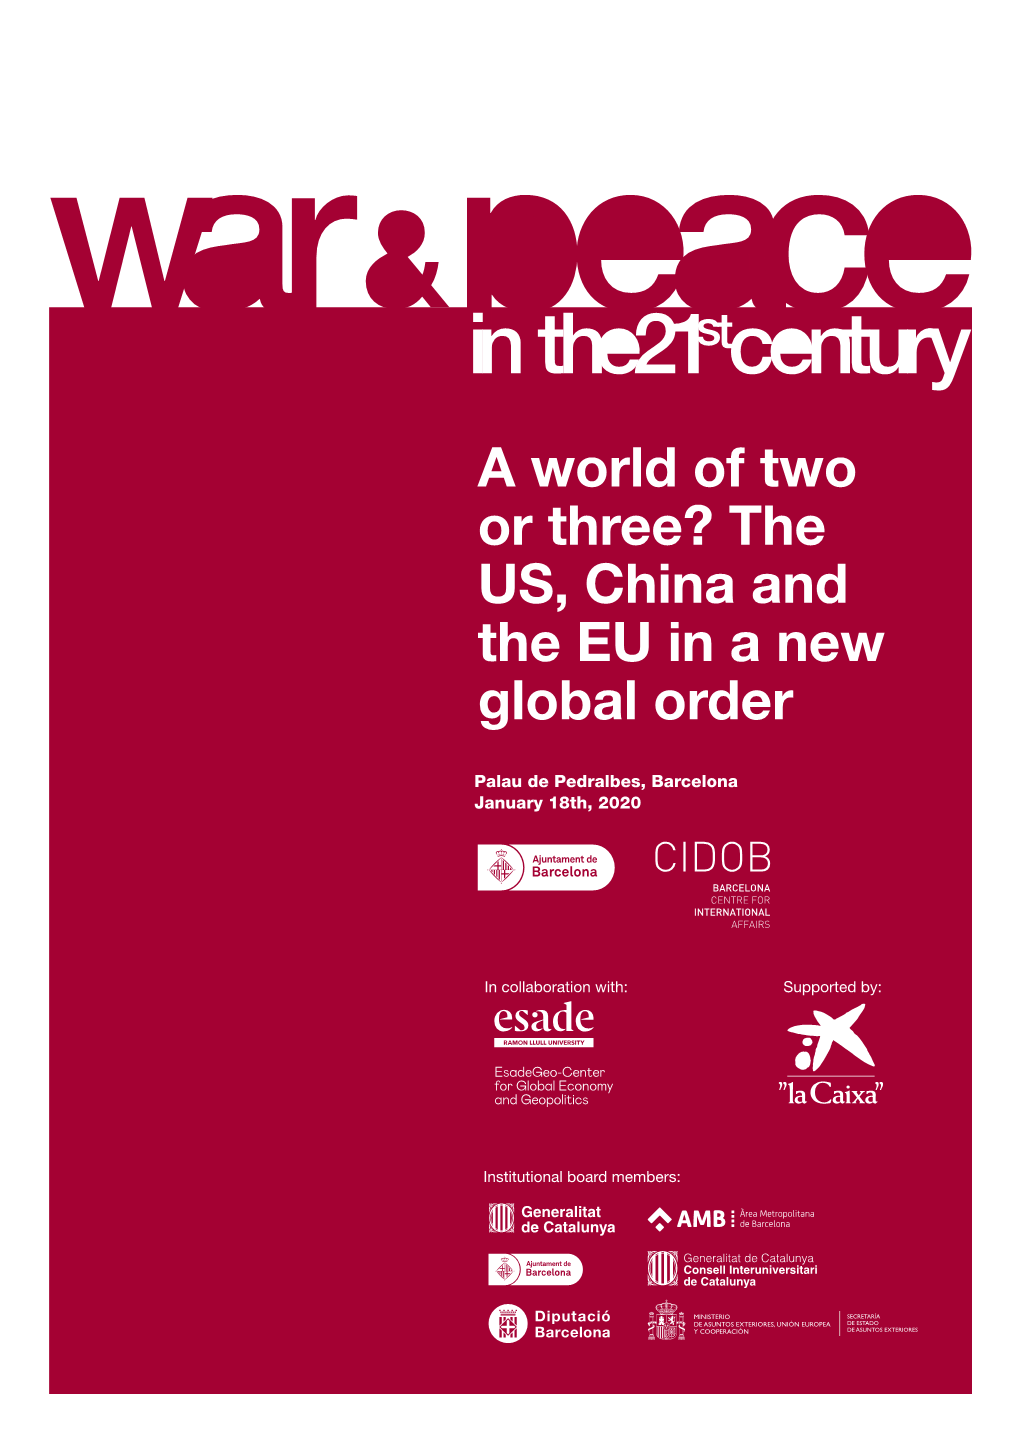 A World of Two Or Three? the US, China and the EU in a New Global Order